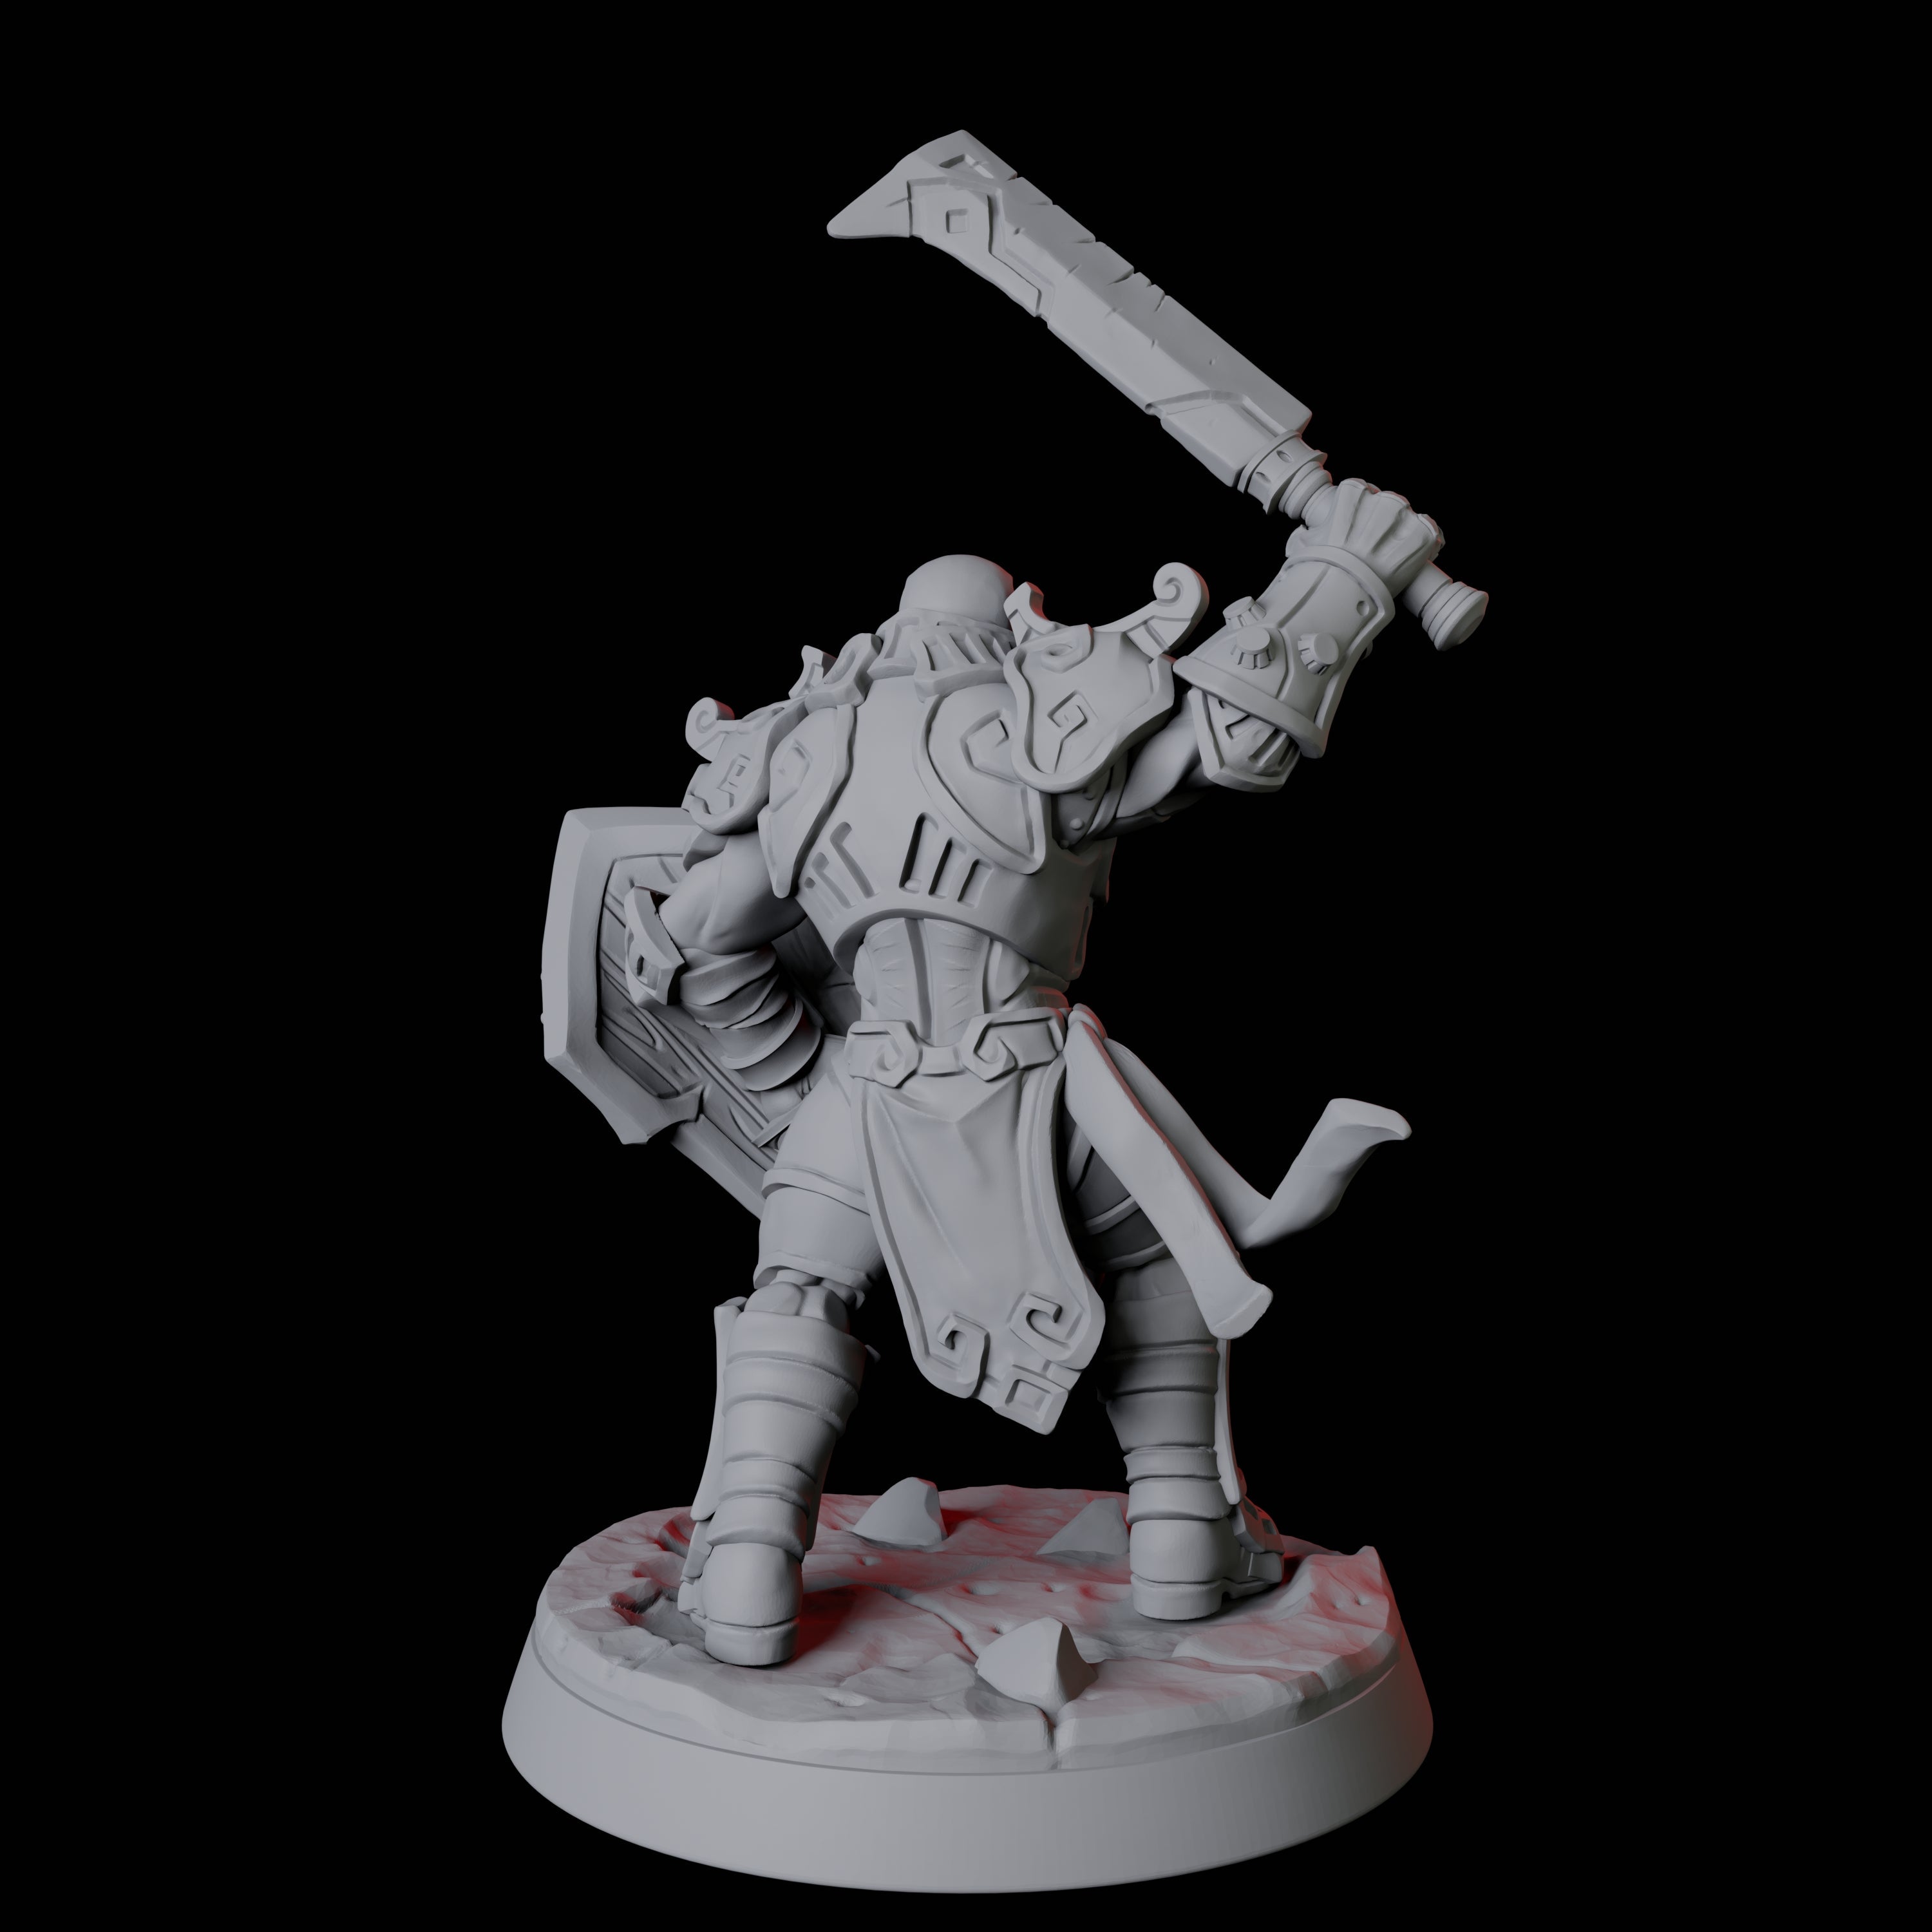 Battle-Ready Warforged A Miniature for Dungeons and Dragons, Pathfinder or other TTRPGs